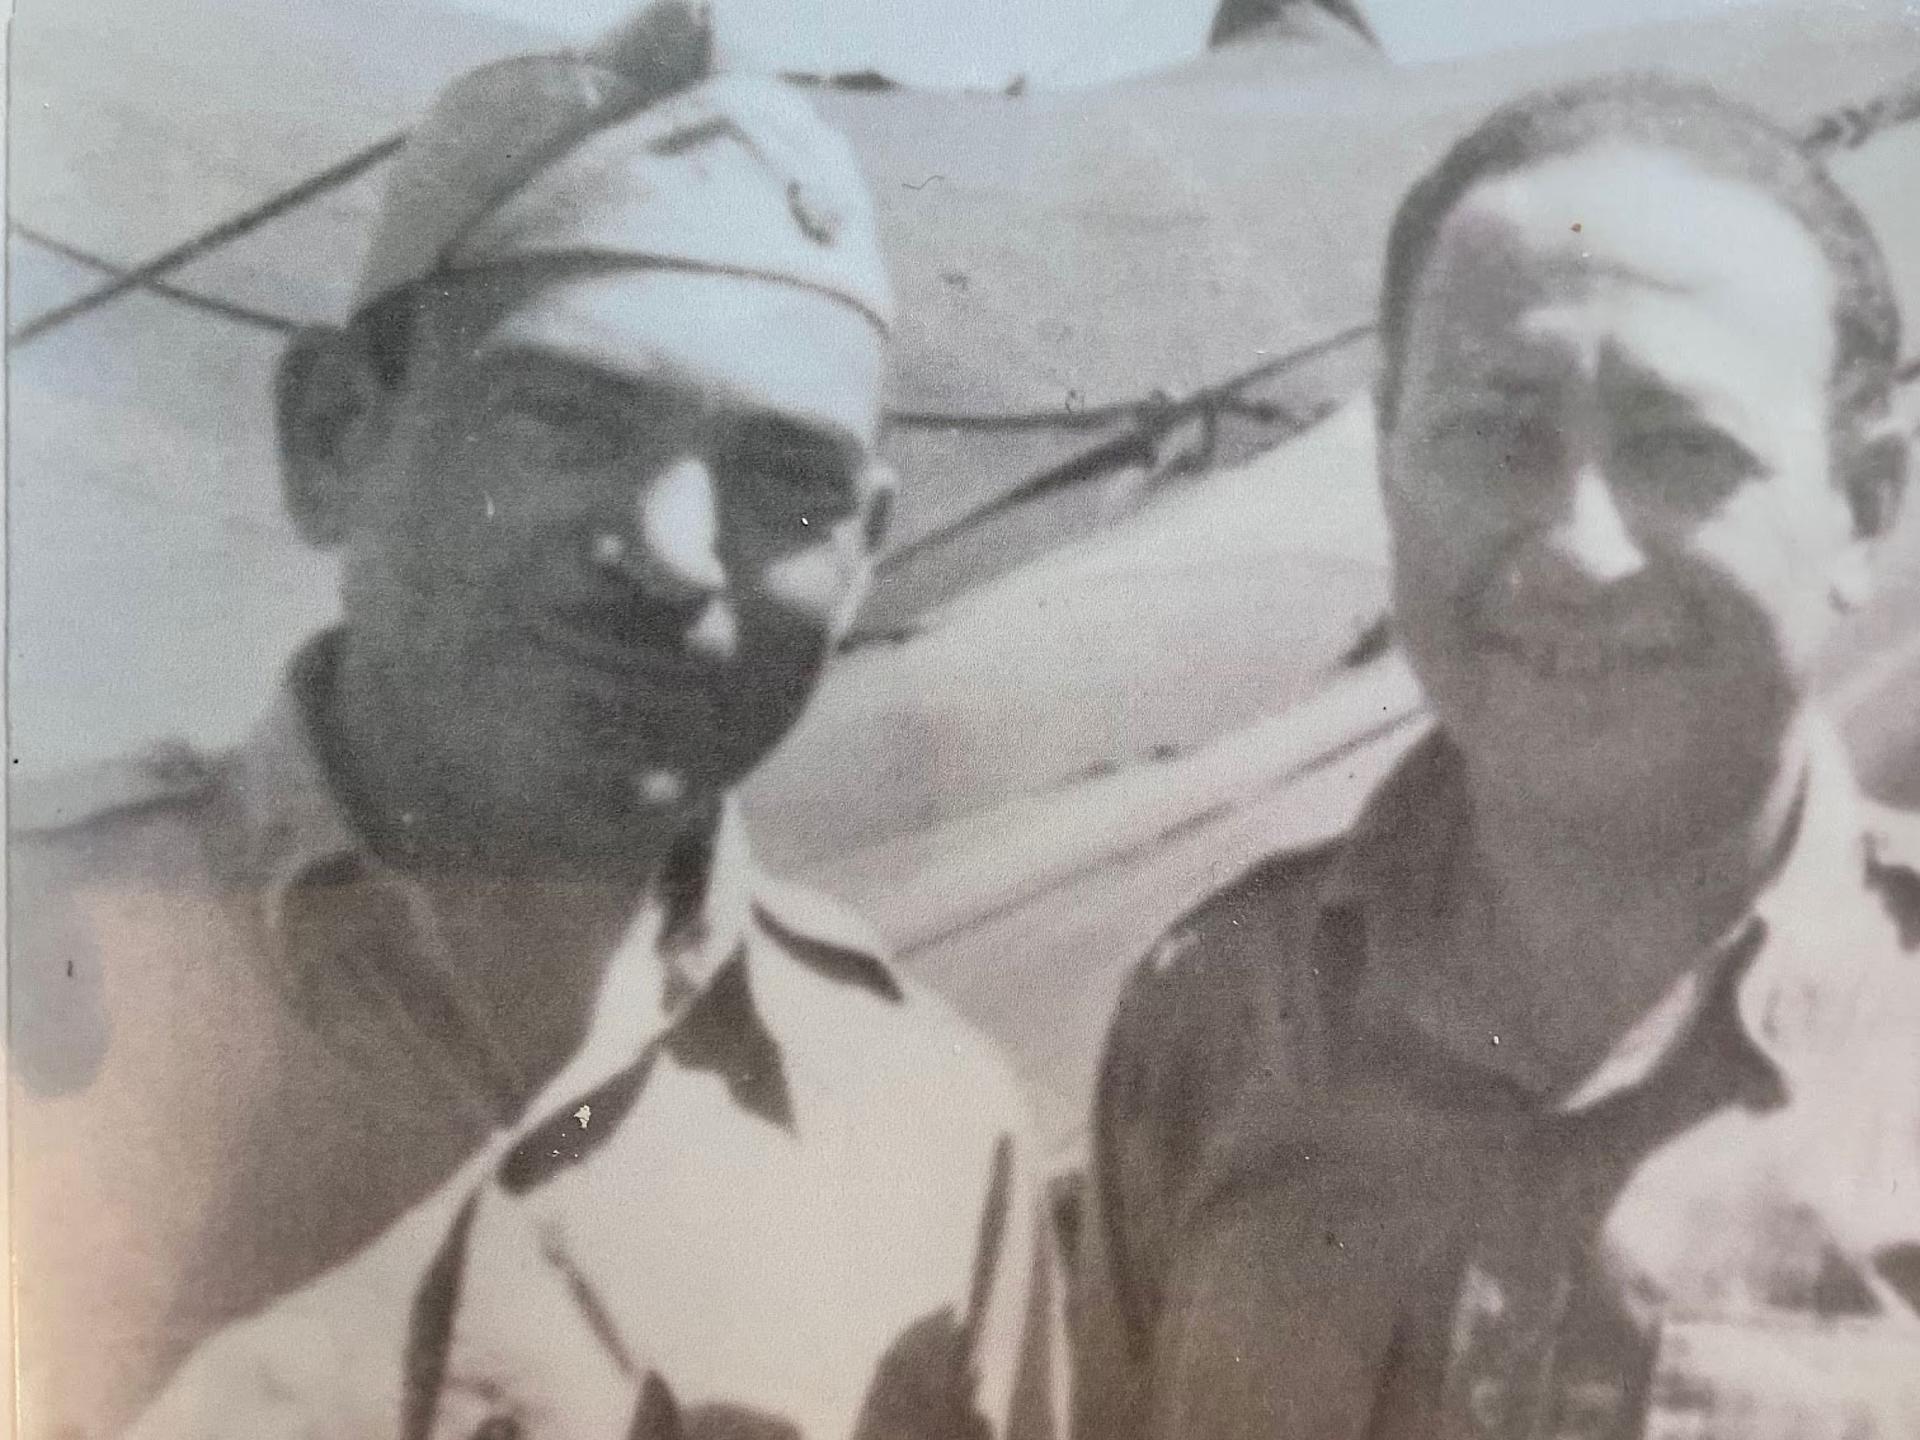 Lt. Col. Manuel E. Lichtenstein (left) stands with famous Lithuanian American violinist Jasha Heifitz, on tour with the USO in southern Italy, during World War II. 